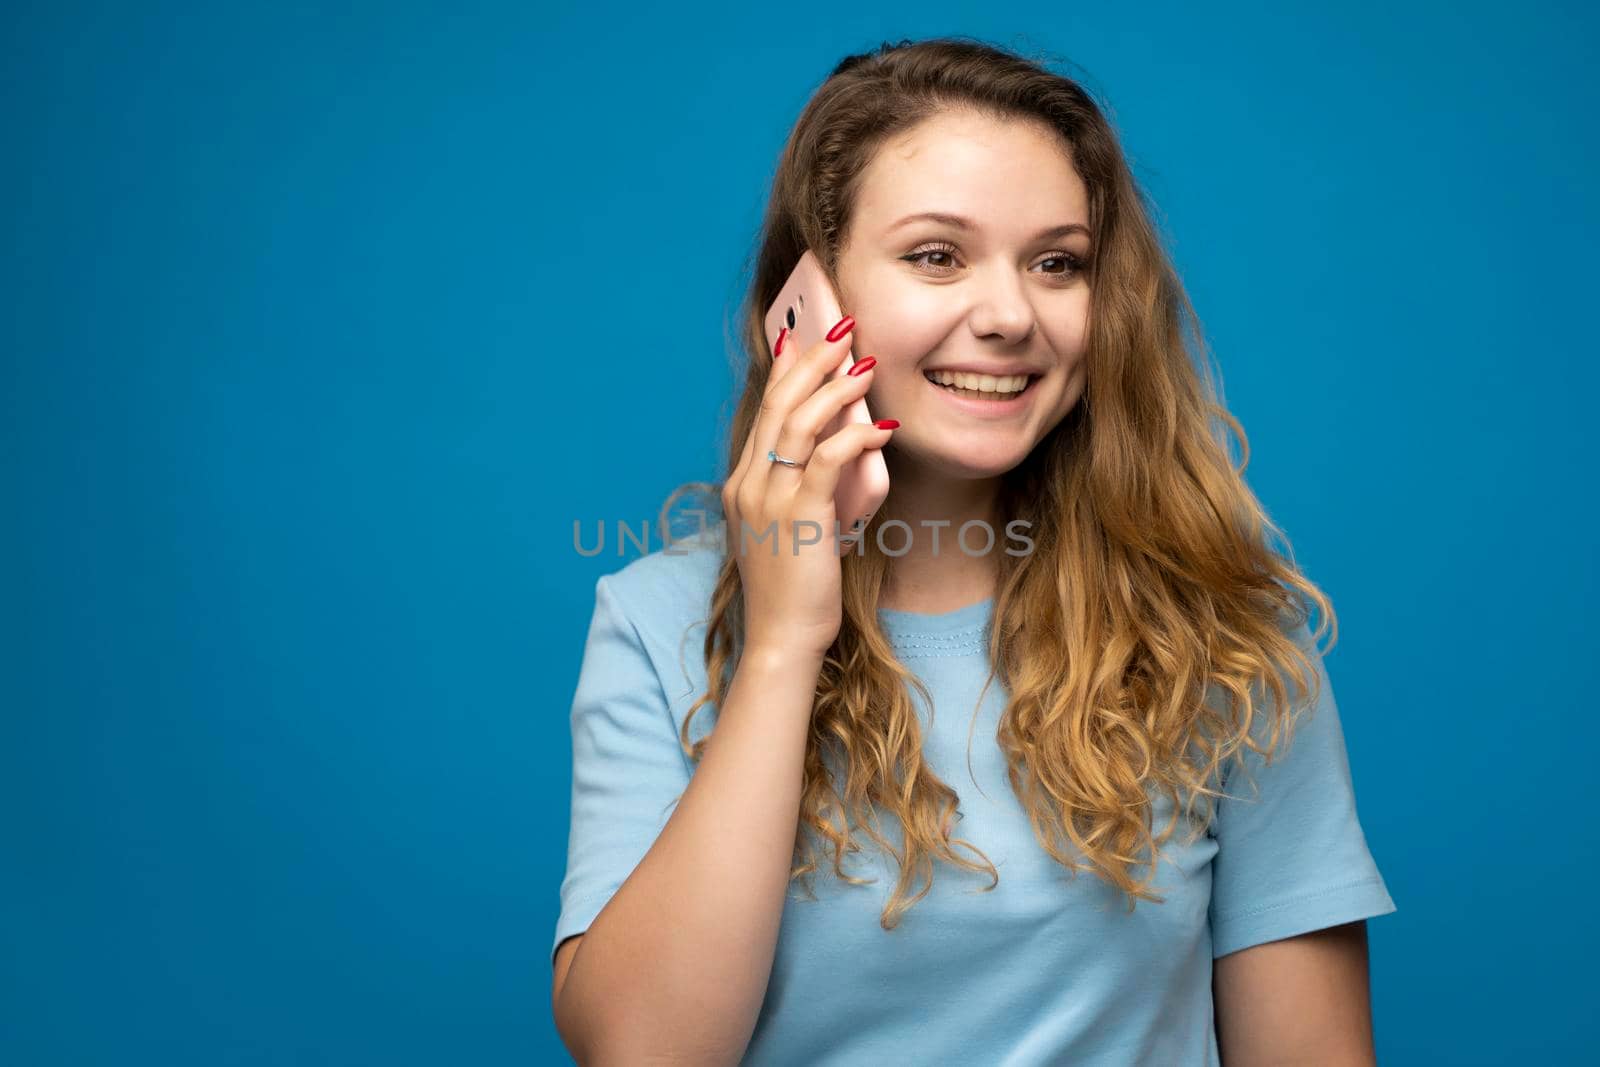 Young smiling happy fun woman in blue basic casual t-shirt talking speak on mobile phone conducting pleasant conversation on blue background studio portrait